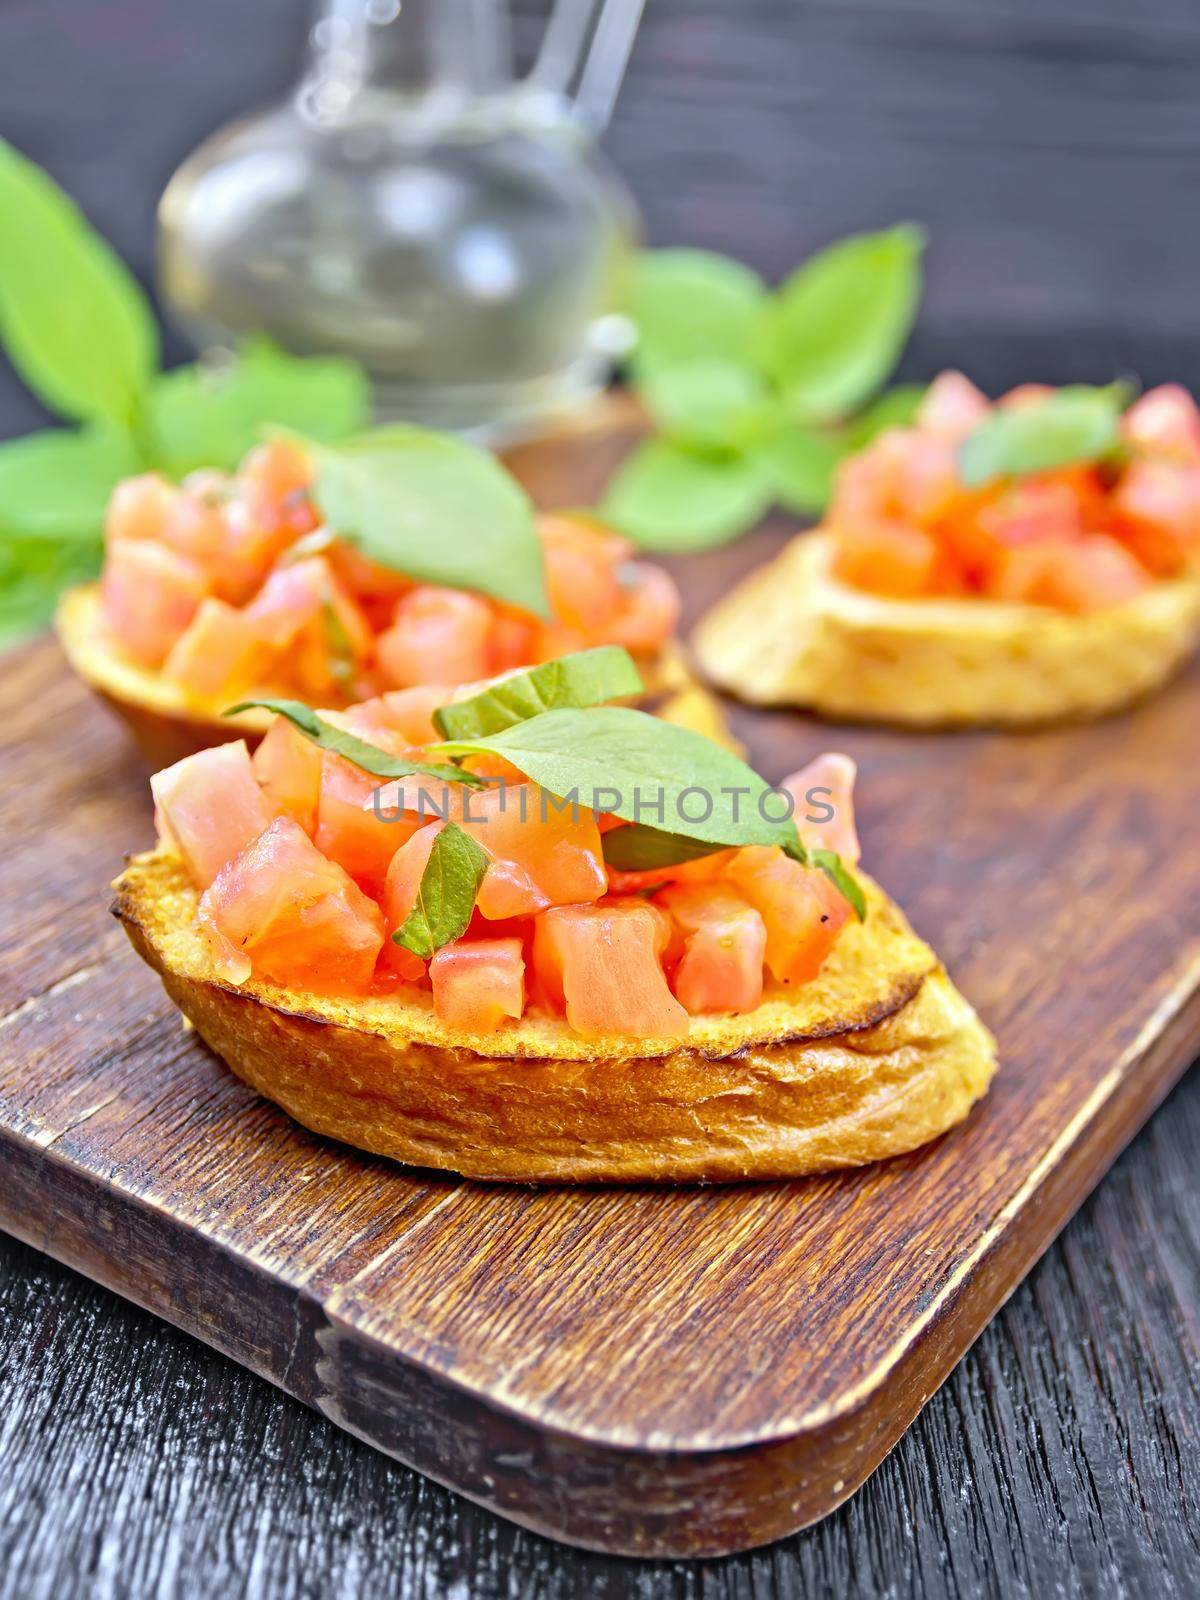 Bruschetta with tomatoes and basil, vegetable oil in a decanter on a wooden board background